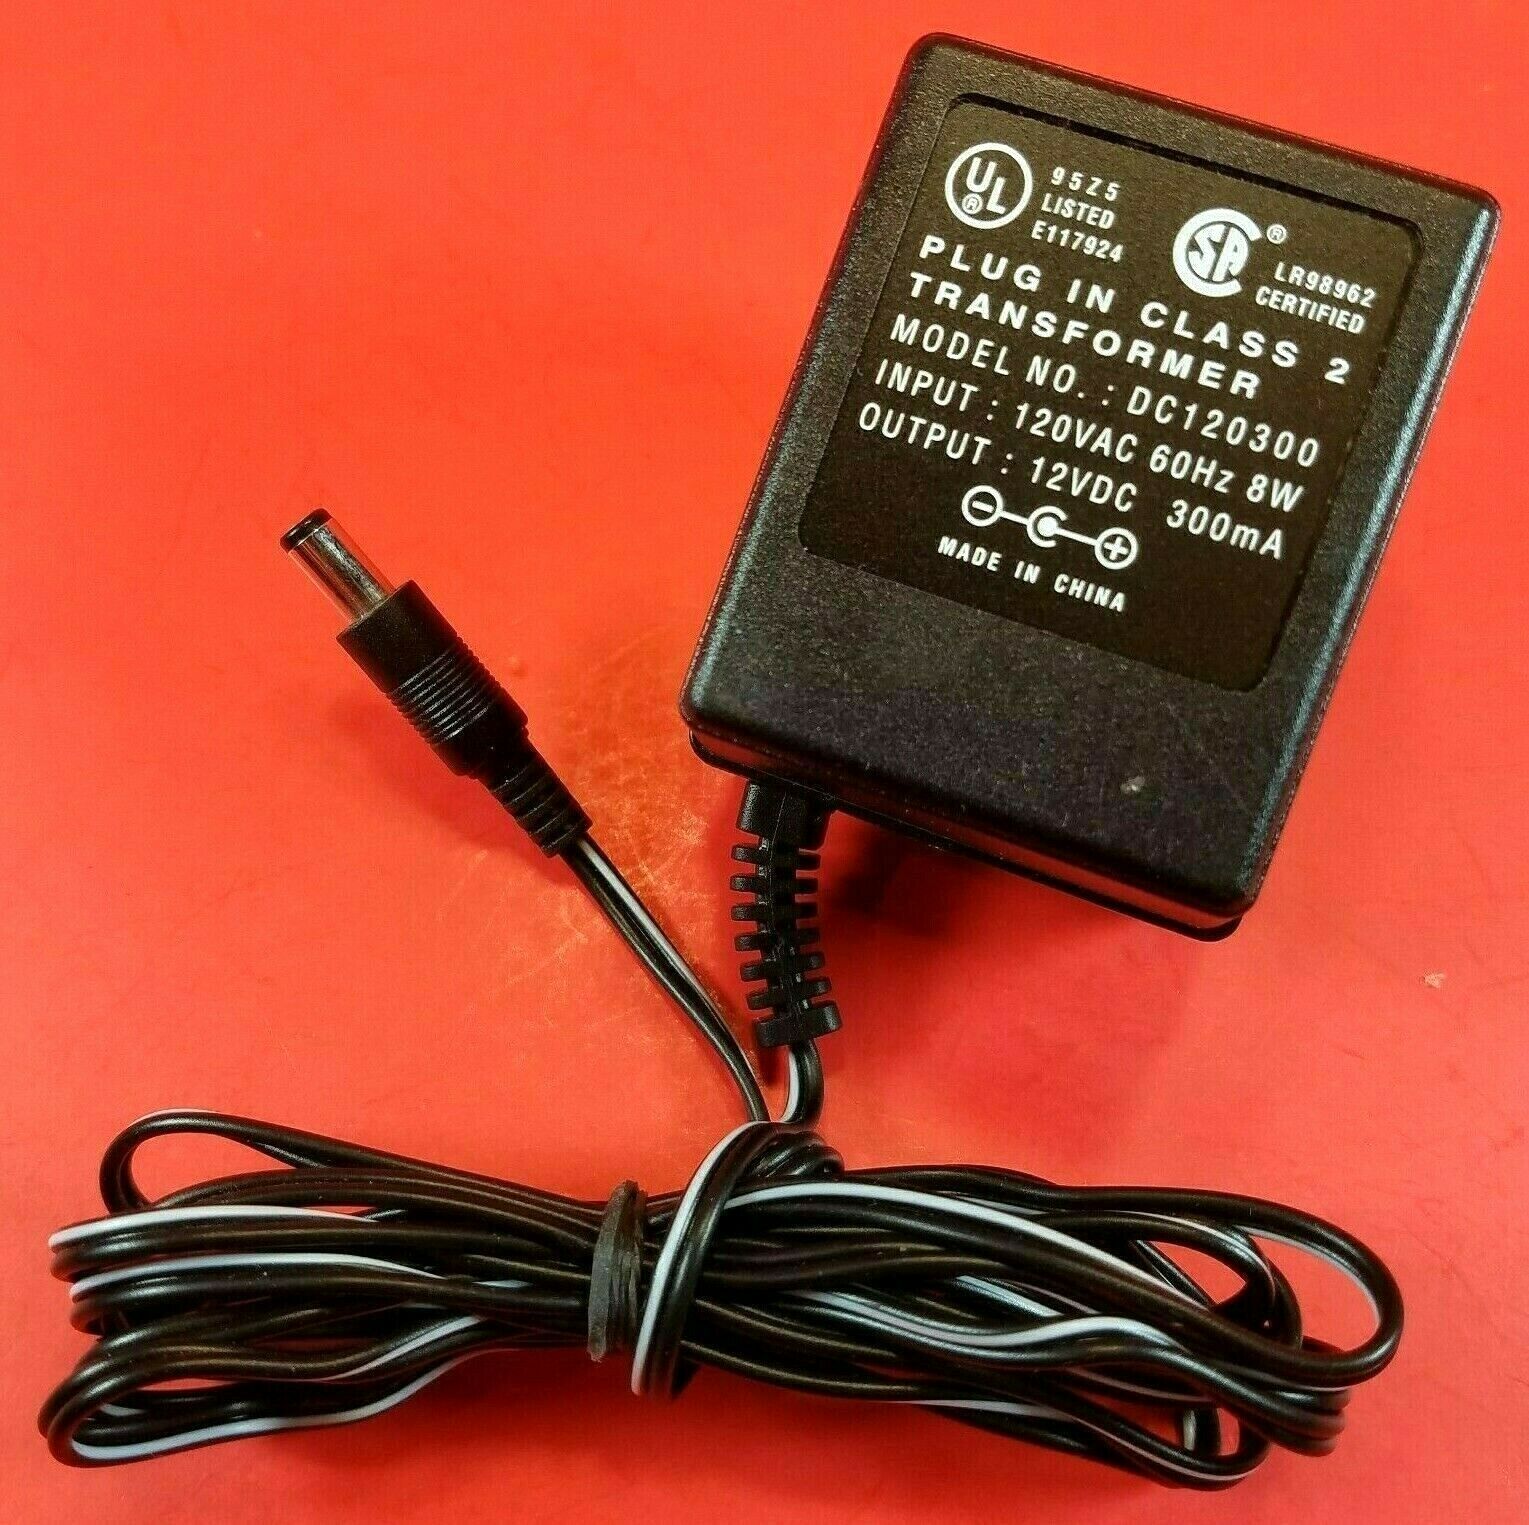 *Brand NEW*Plug In Class 2 Transformer DC120300 Power Supply 12V - 300mA OEM AC/DC Adapter - Click Image to Close